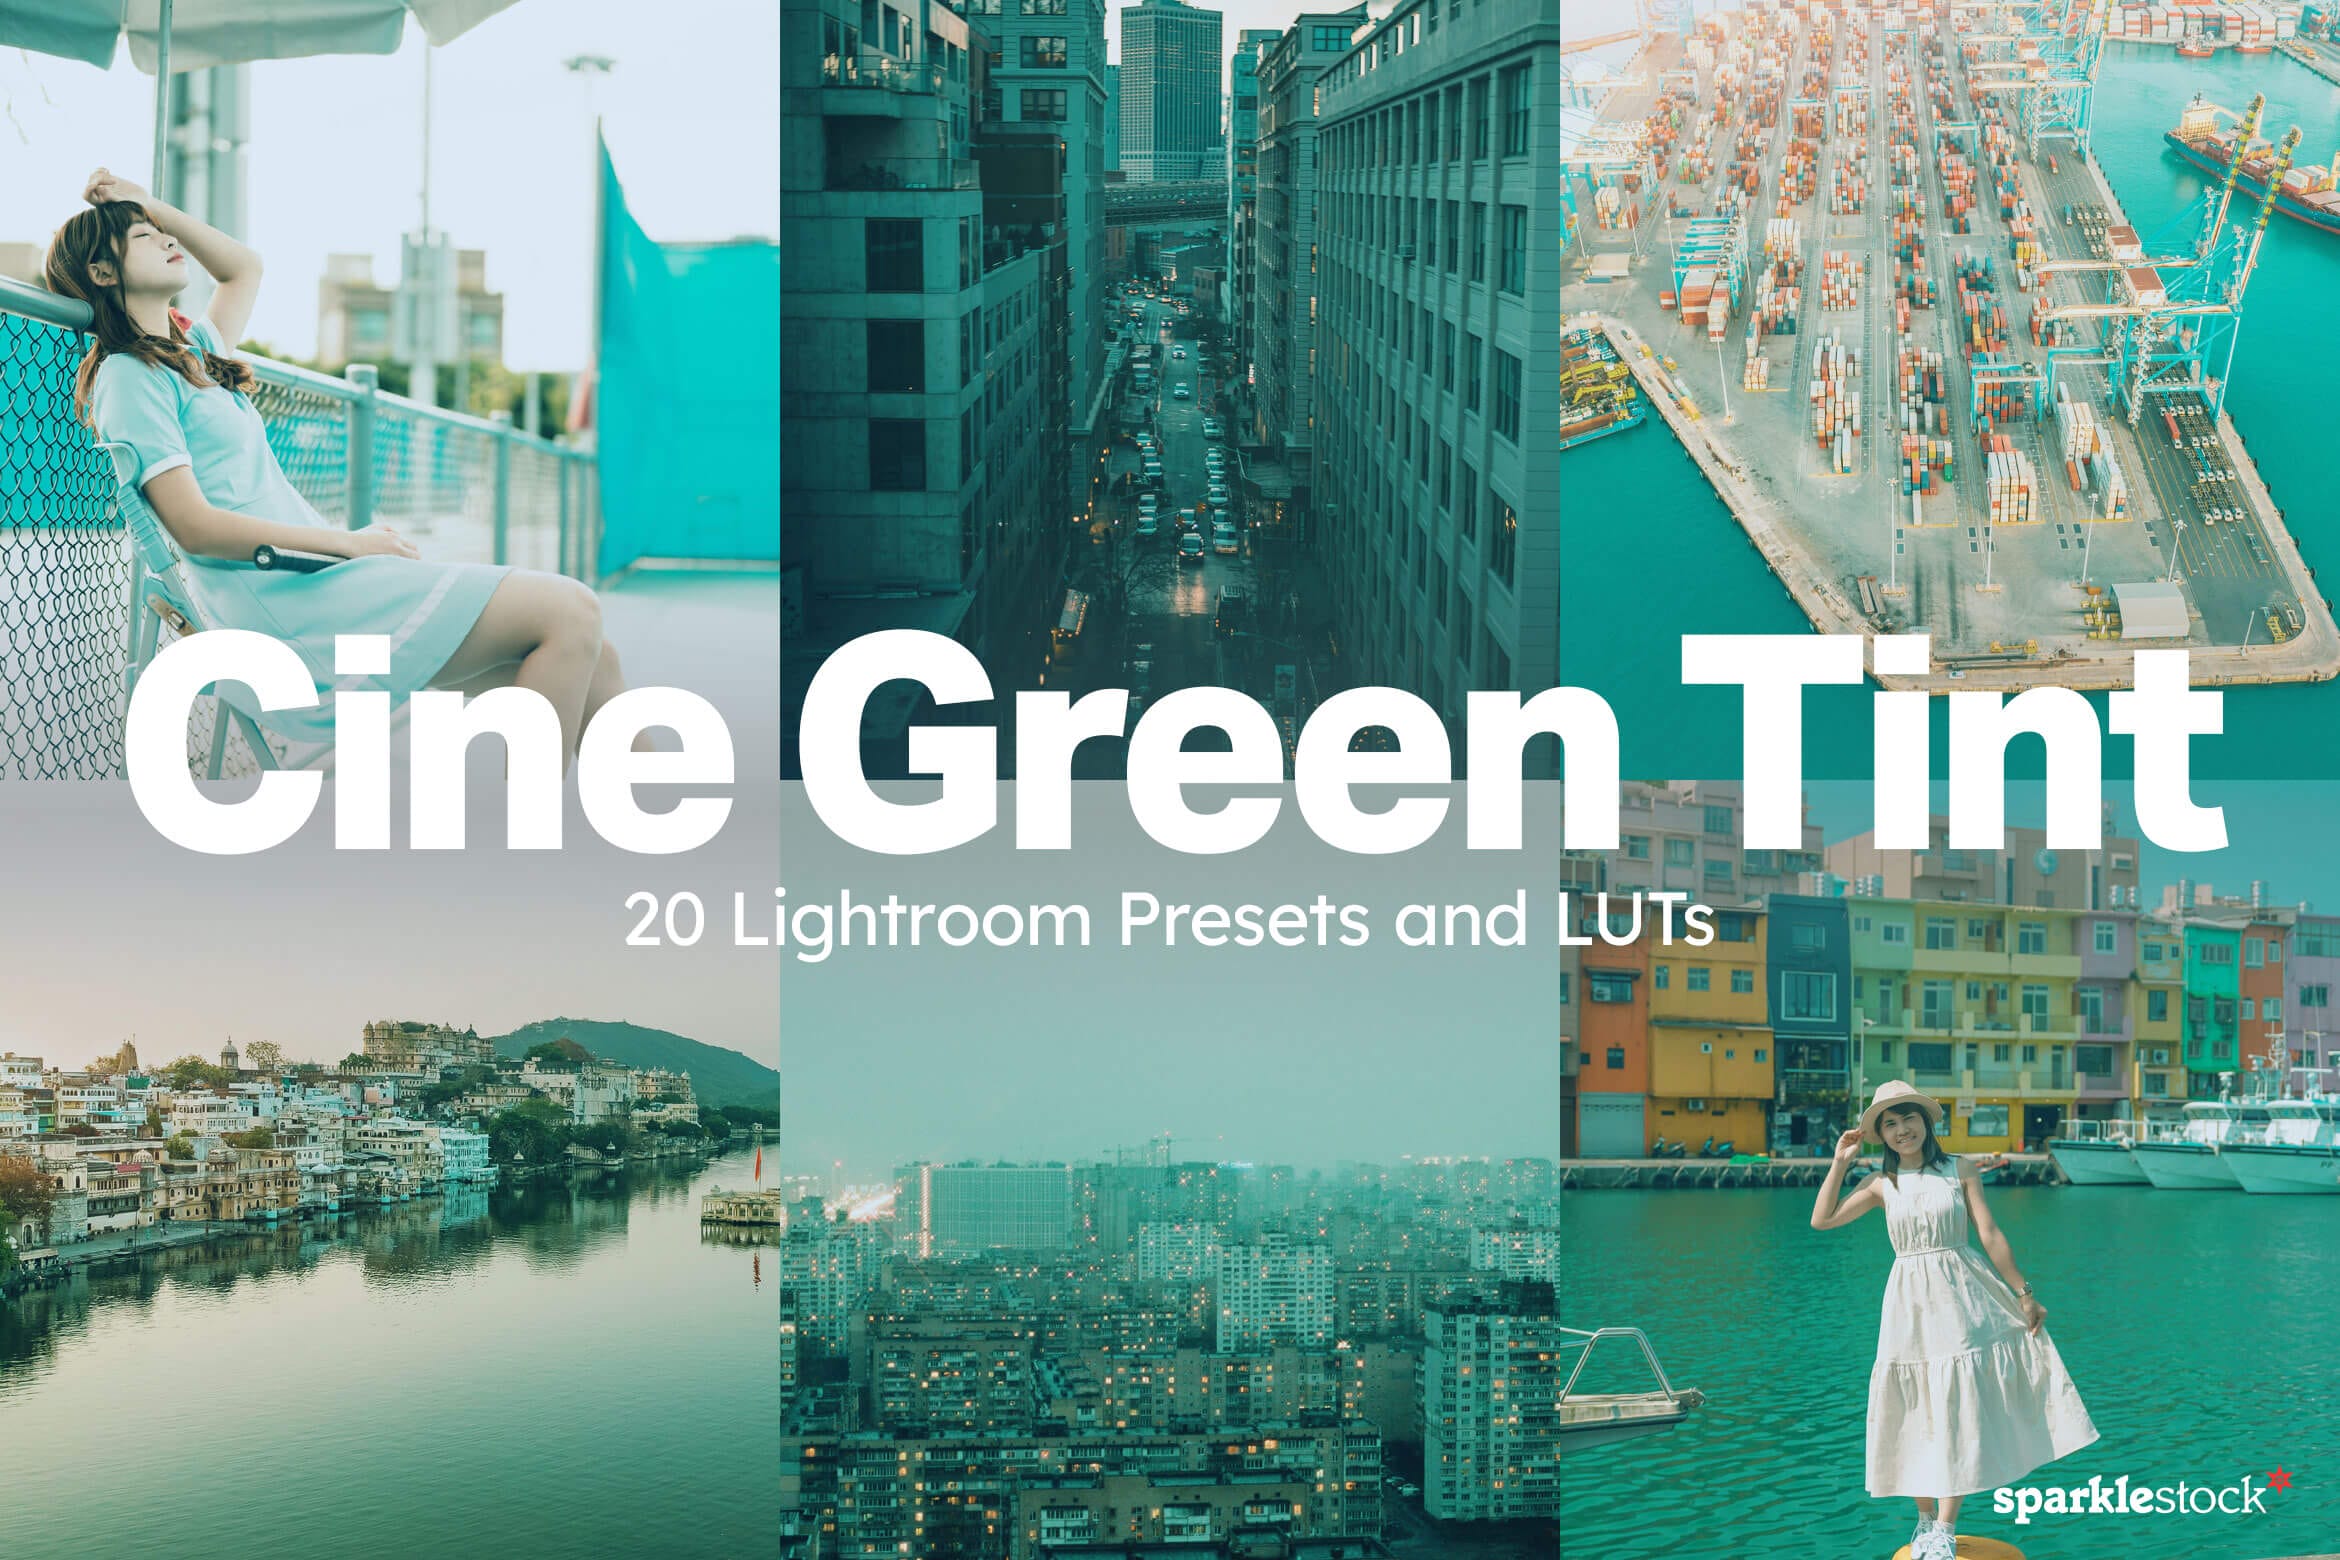 20 Cine Green Tint Lightroom Presets and LUTs